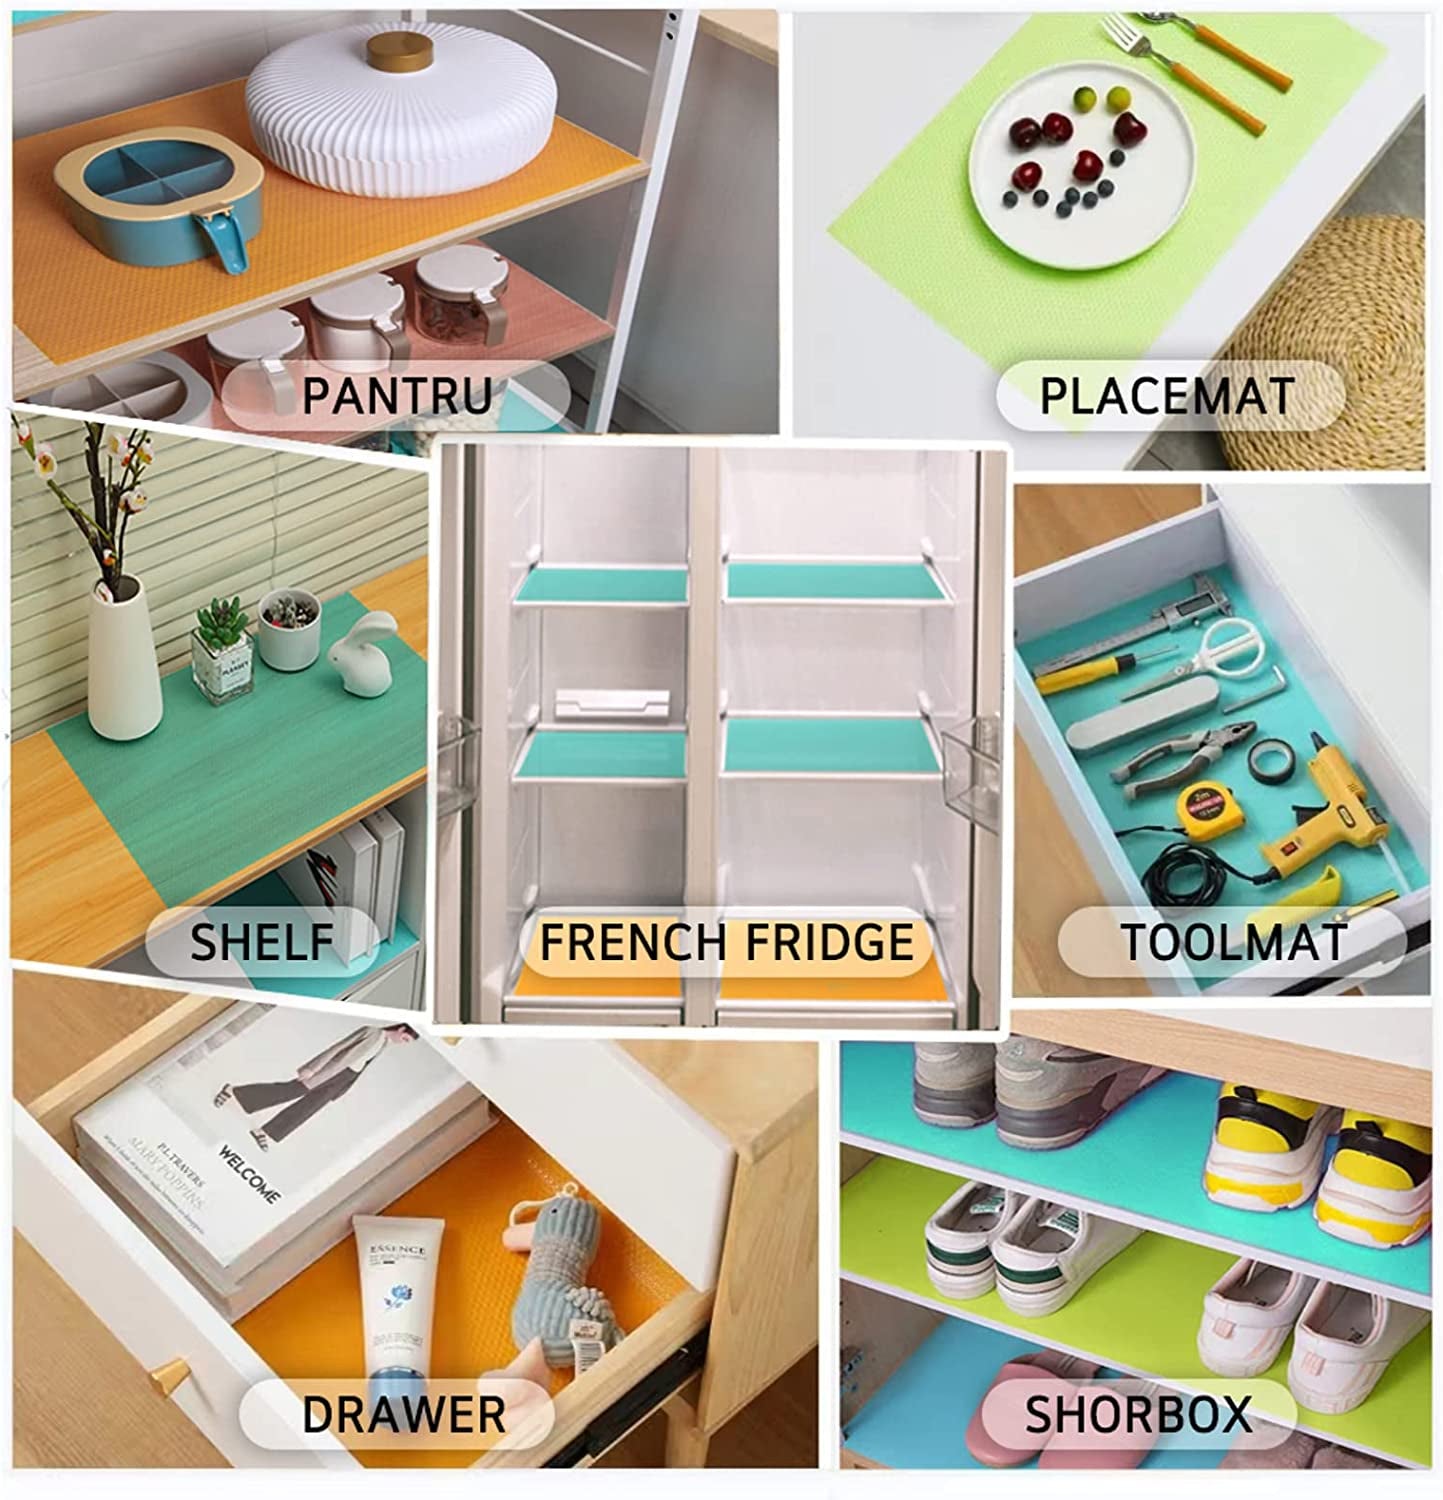 16 Pcs Refrigerator Liners,Washable Cuttable Refrigerator Liner Fits Any Refrigerator Size,Home Kitchen Gadgets Accessories for Non-Slip Waterproof Refrigerator Liner Drawer Table Mat Utensil Coaster